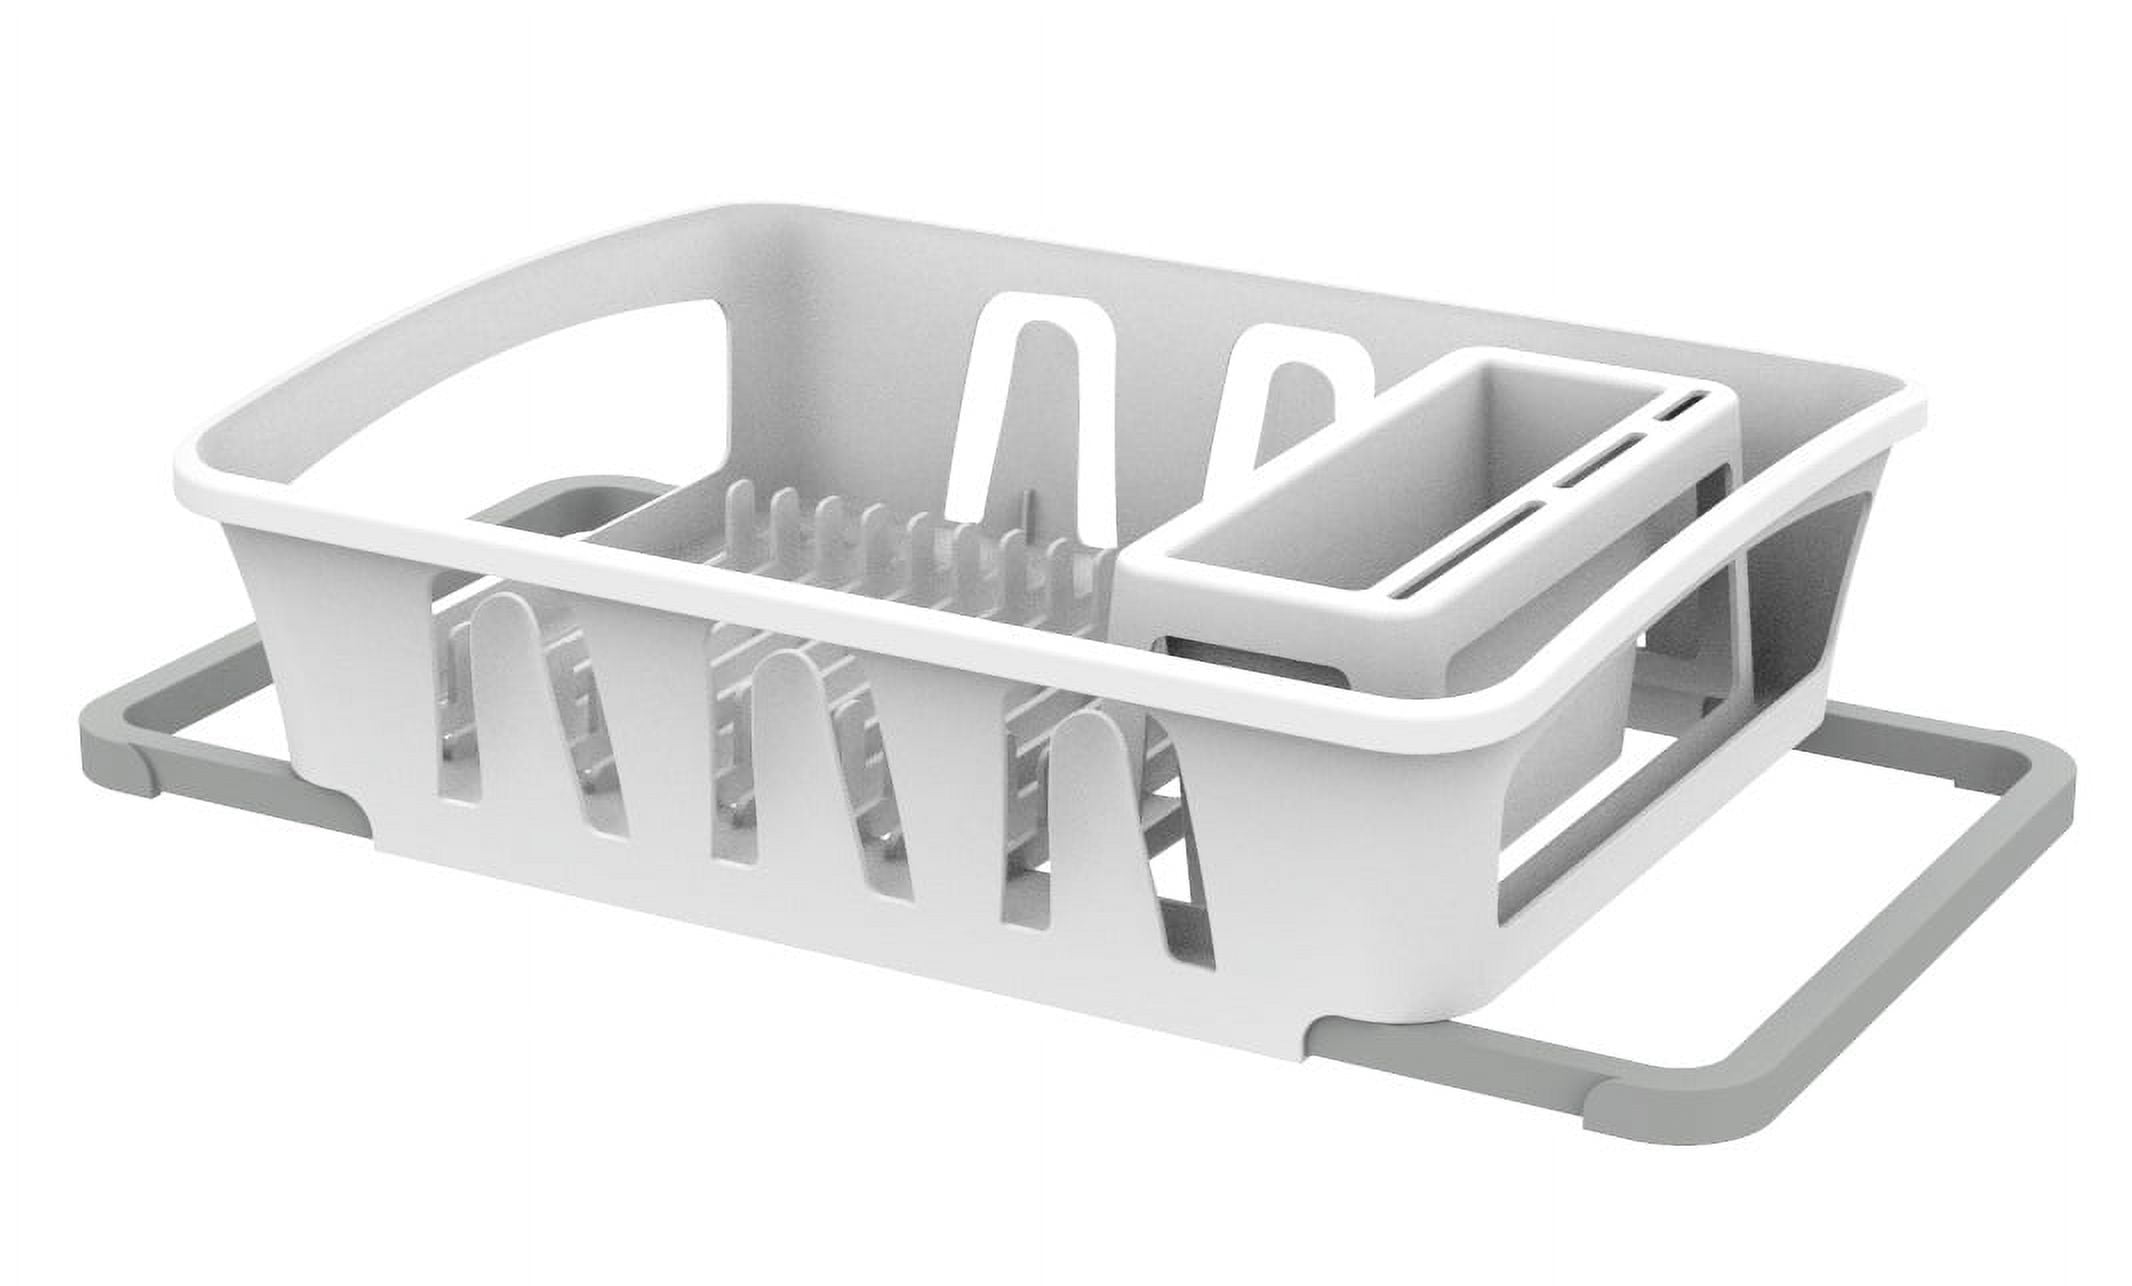 BEAUTY DEPOT 1Pc Silver Stainless Steel Dish Drying Rack, Expandable Sink  Dish Drainer For Kitchen, Dish Drainer For Washing Bowls, Dishes, Fruits  And Vegetables, Carton Packaging, Size Adjustment  (9.84-16.34Inch/25-41.5Cm)